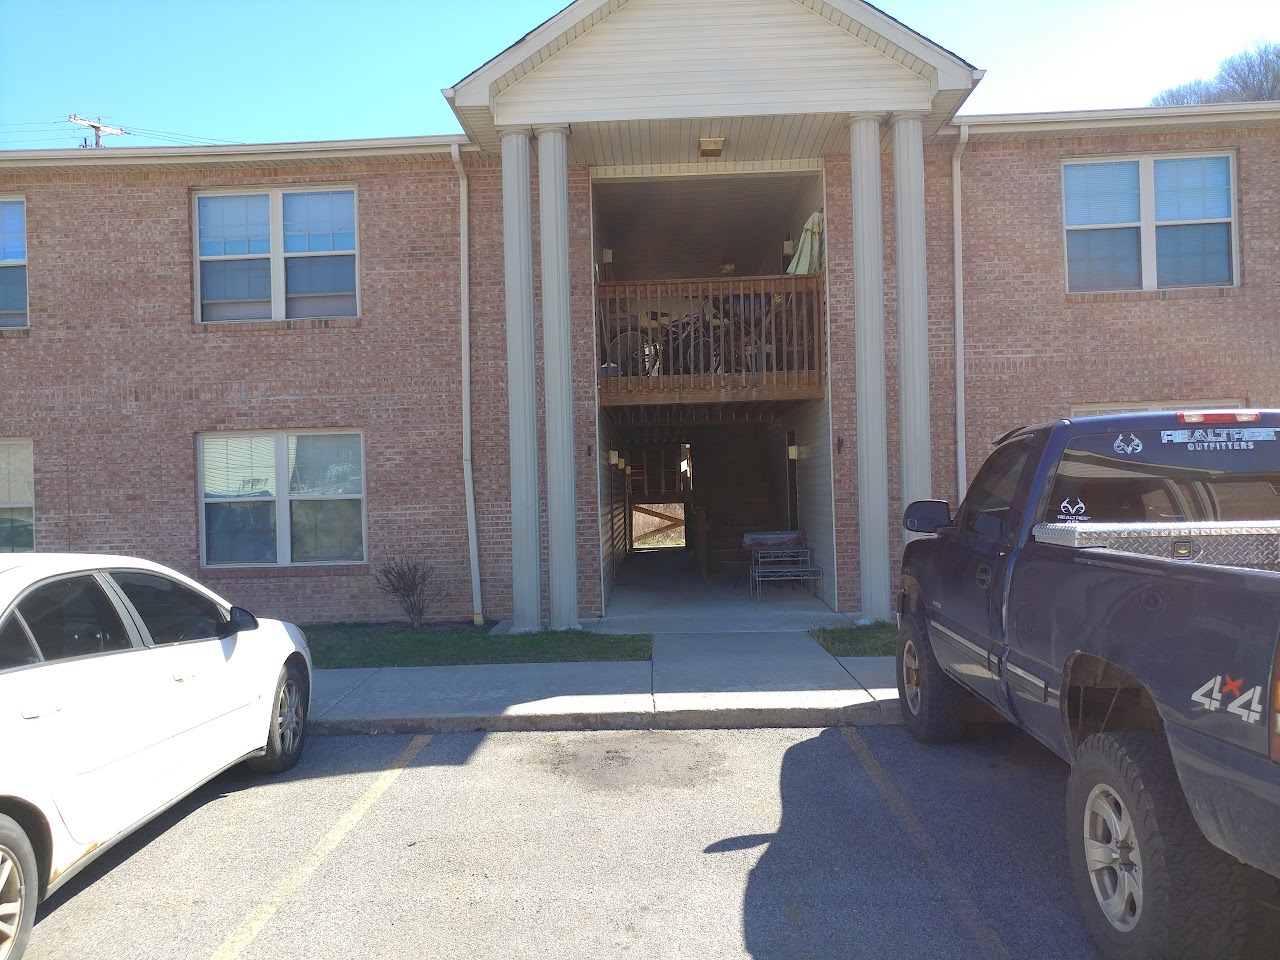 Photo of PAULI HEIGHTS APTS. Affordable housing located at 230 PAULI HEIGHTS PL BLUEFIELD, WV 24701